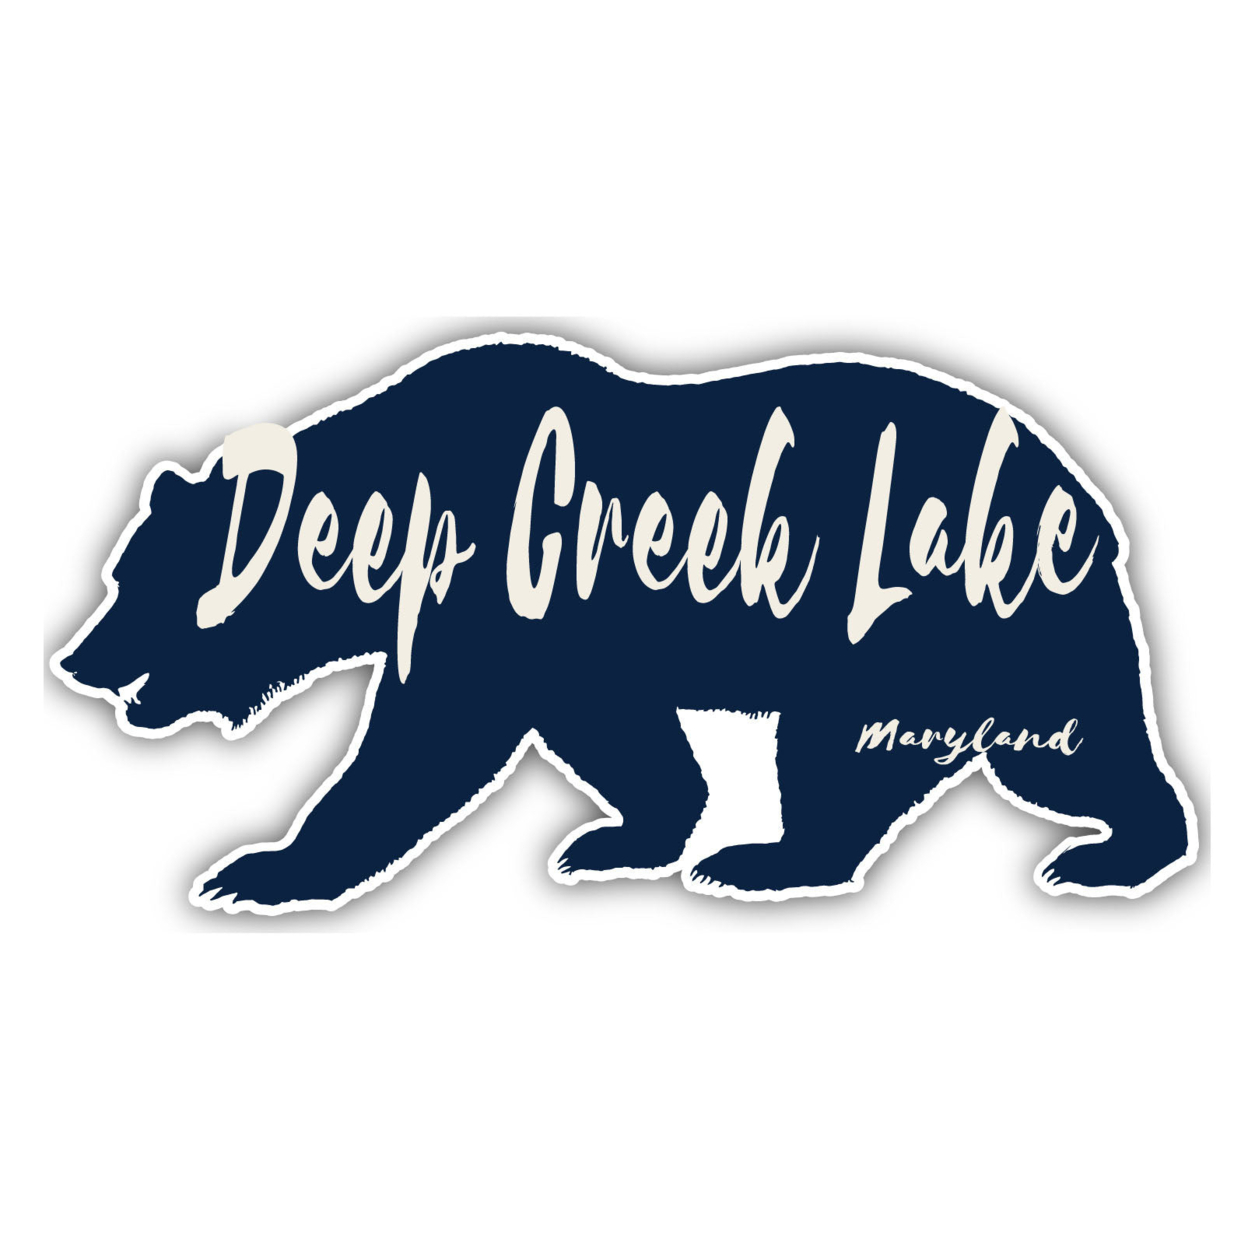 Deep Creek Lake Maryland Souvenir Decorative Stickers (Choose Theme And Size) - 4-Pack, 4-Inch, Bear